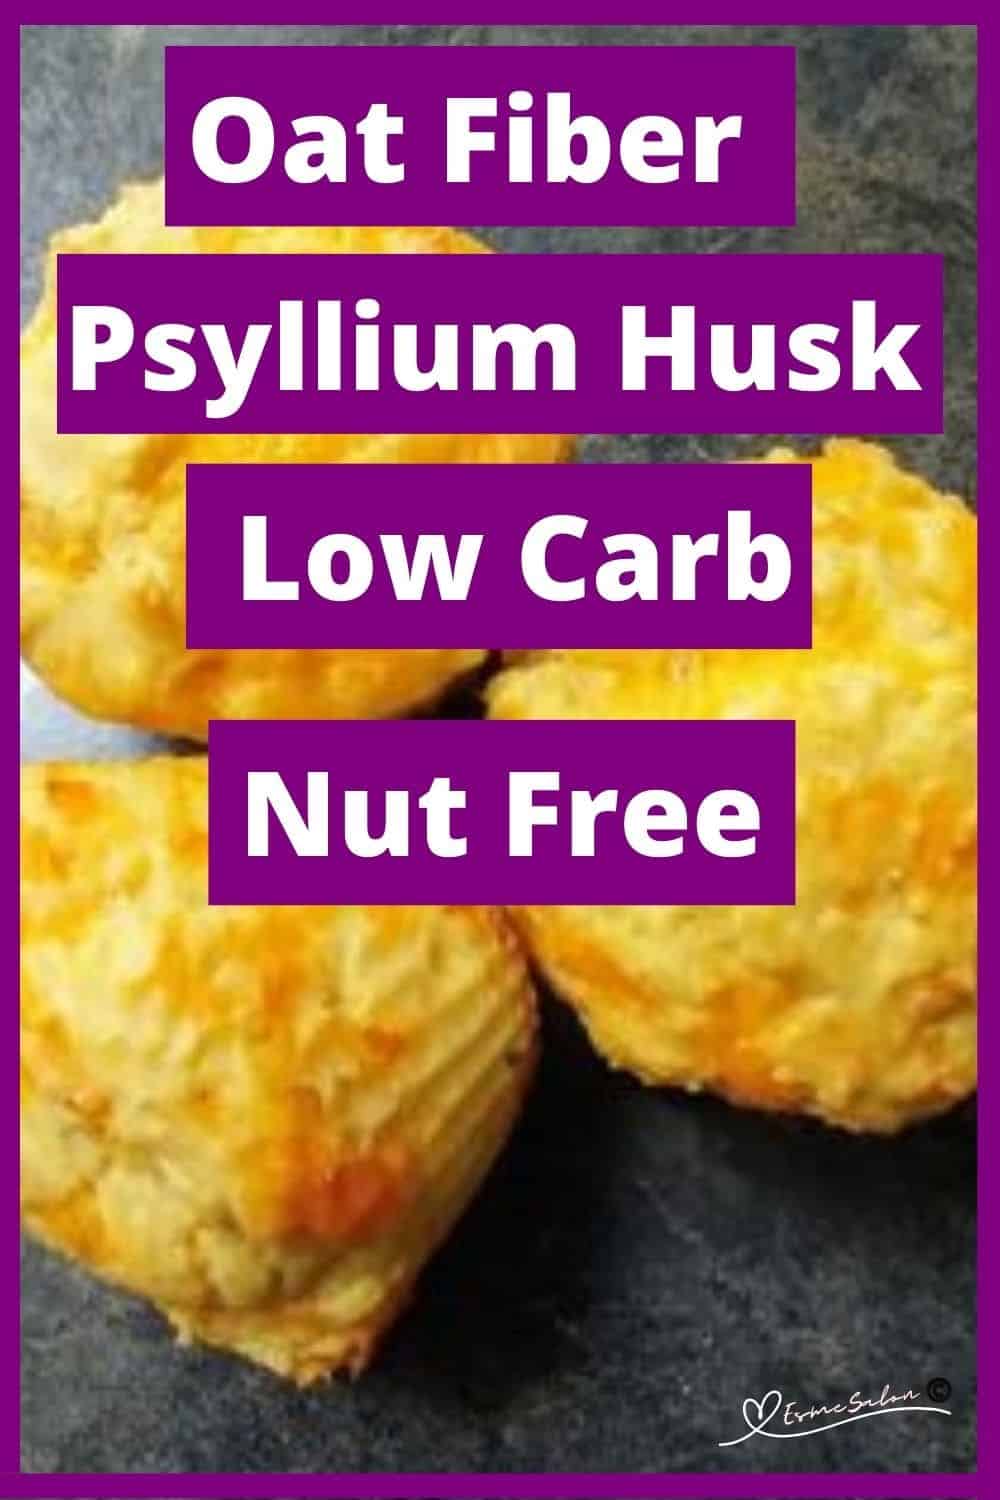 an image of Cheesy Oat FIber Psyllium Husk Low Carb Nut Free Muffins